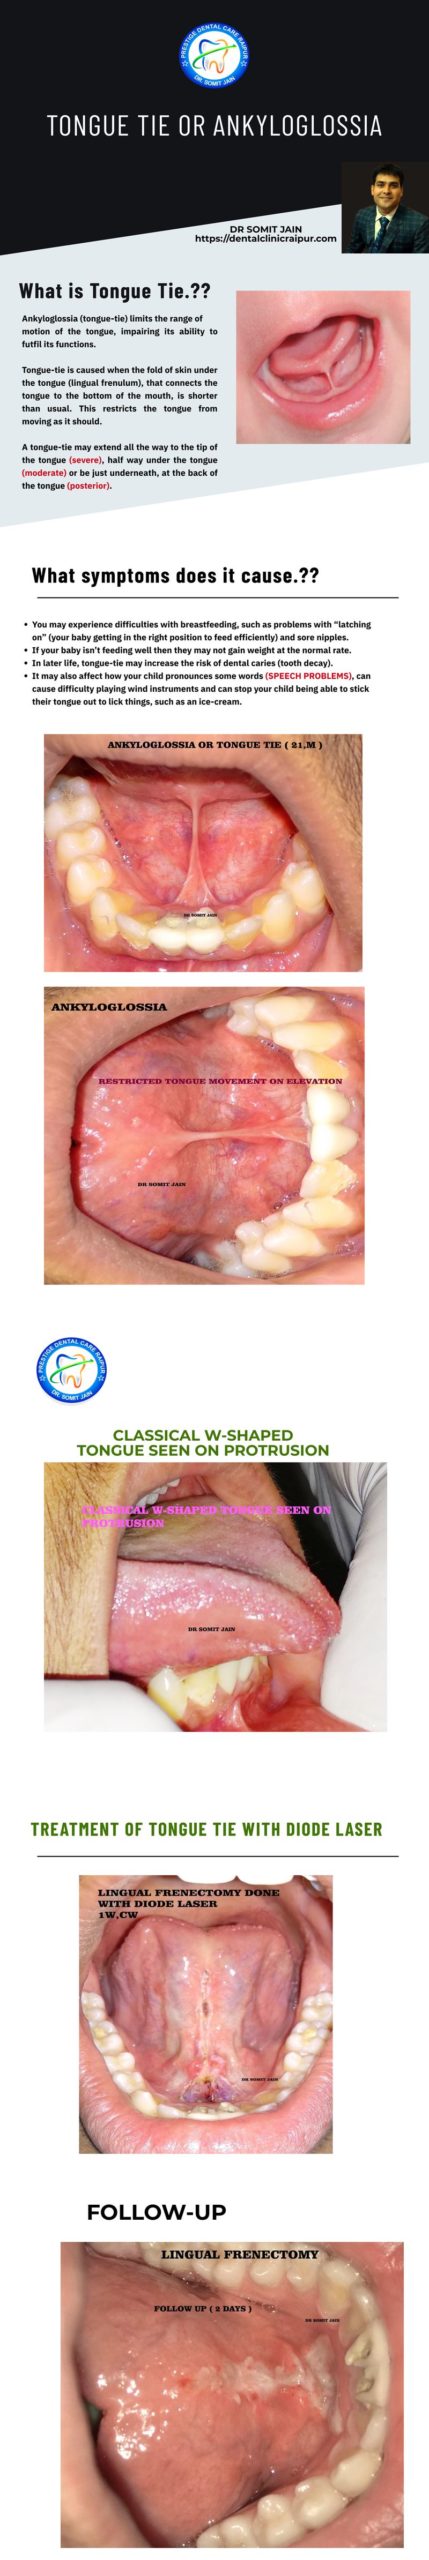 Tongue tie or Ankyloglossia Infographic